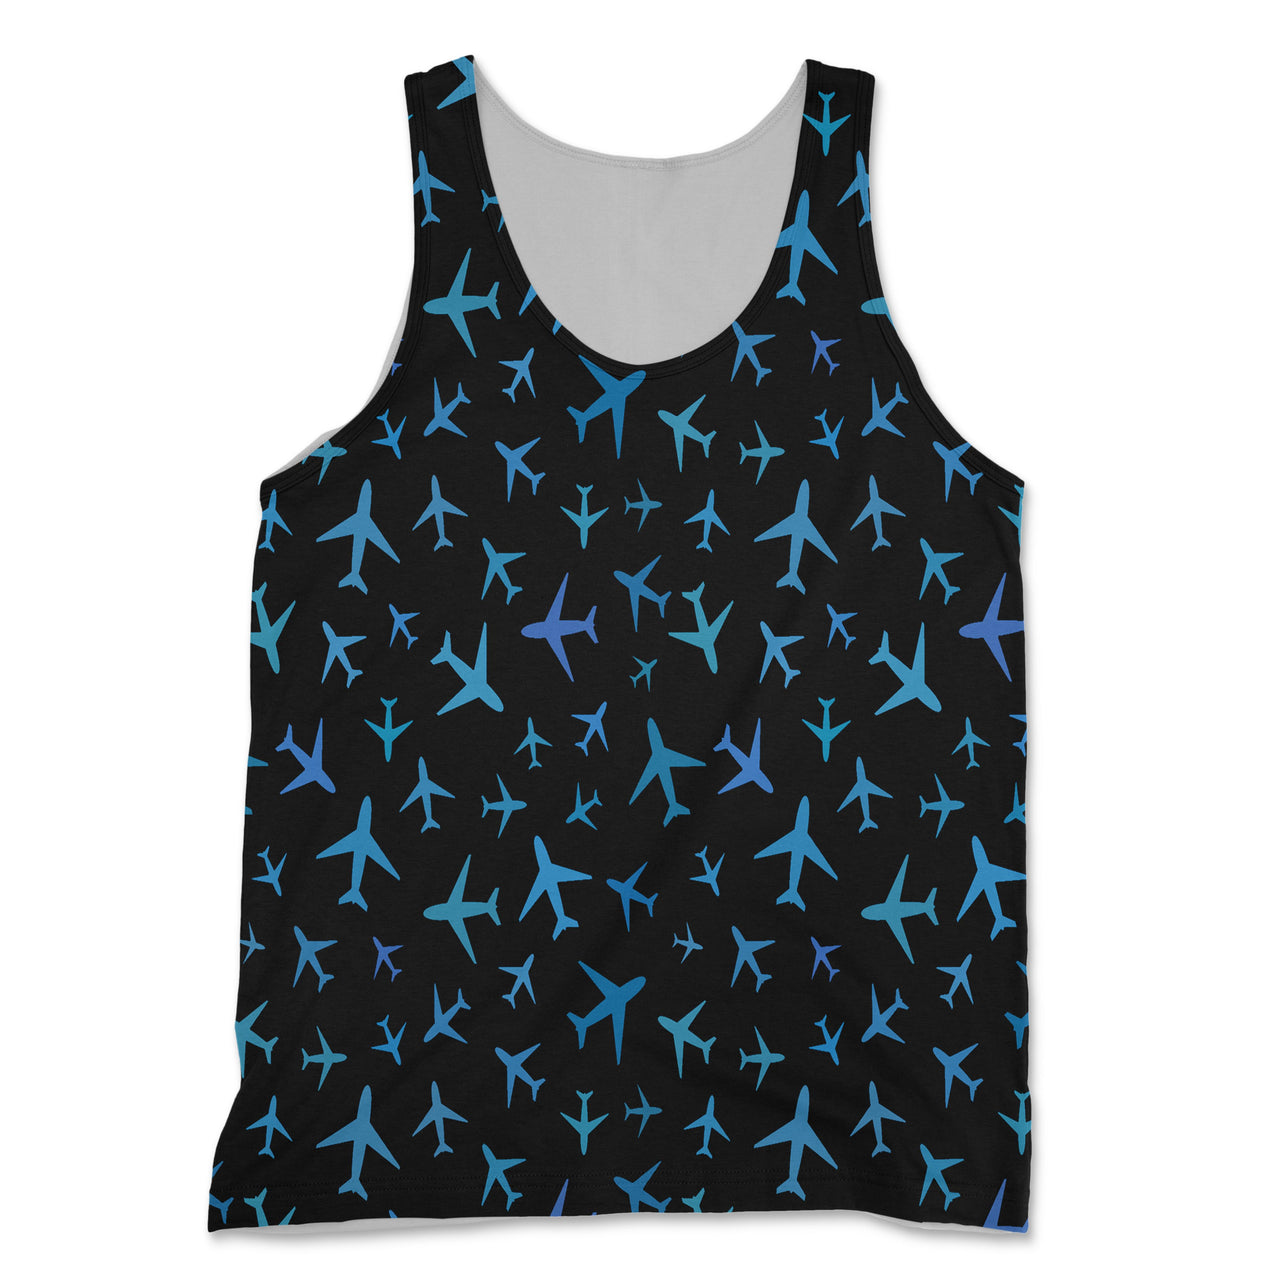 Many Airplanes (Black) Designed 3D Tank Tops